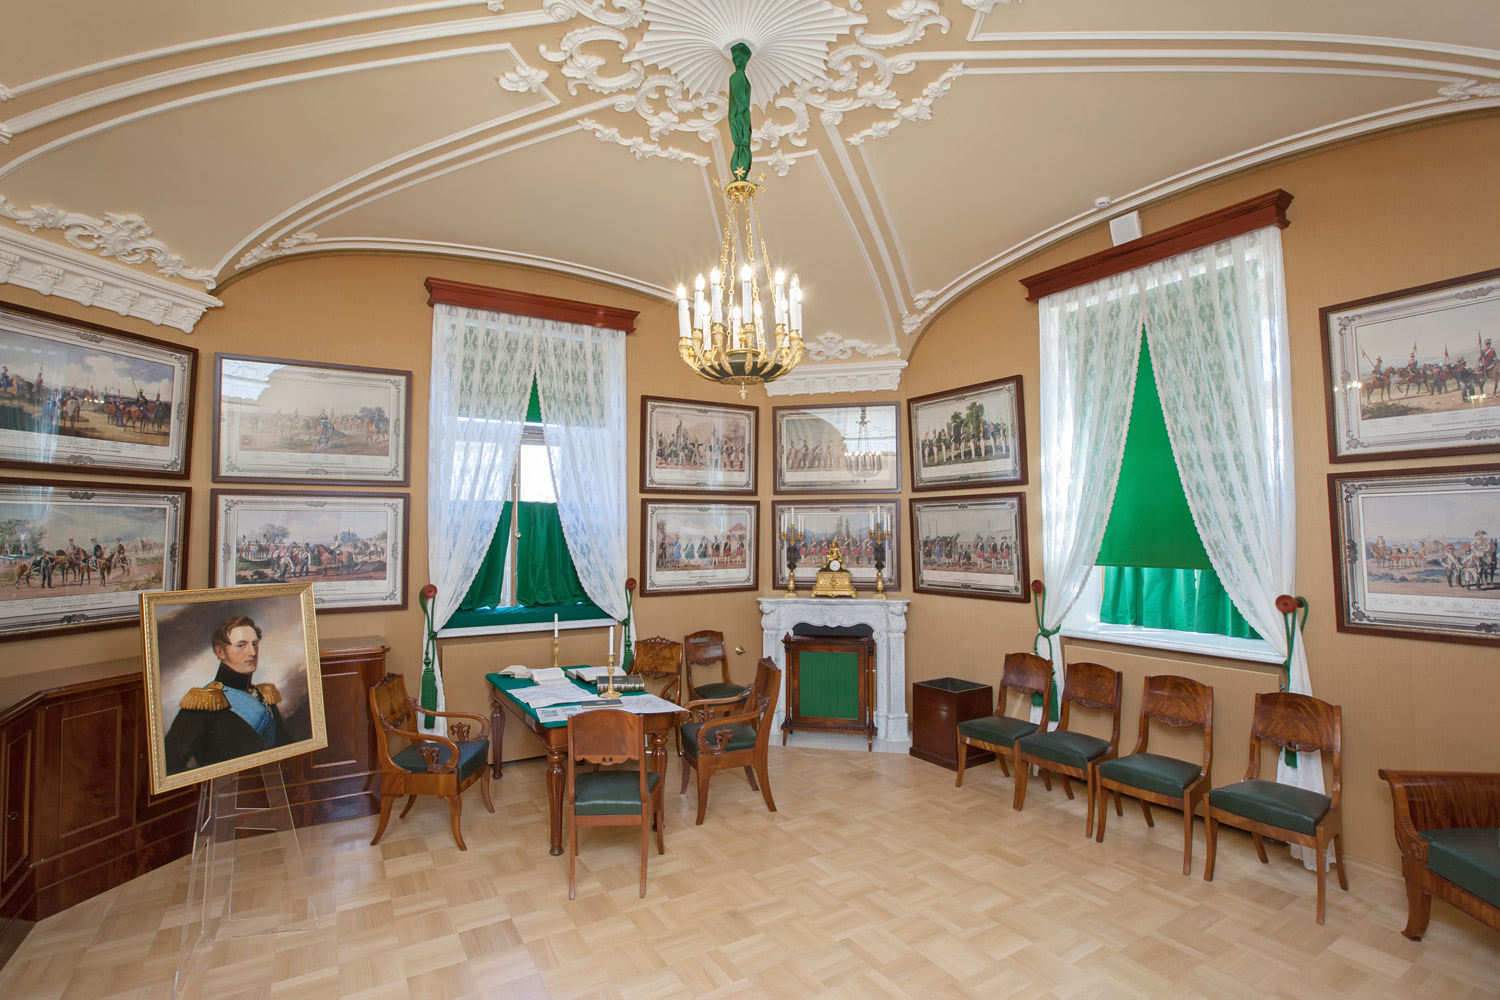 The Rooms of Nicholas I in the Gatchina Palace